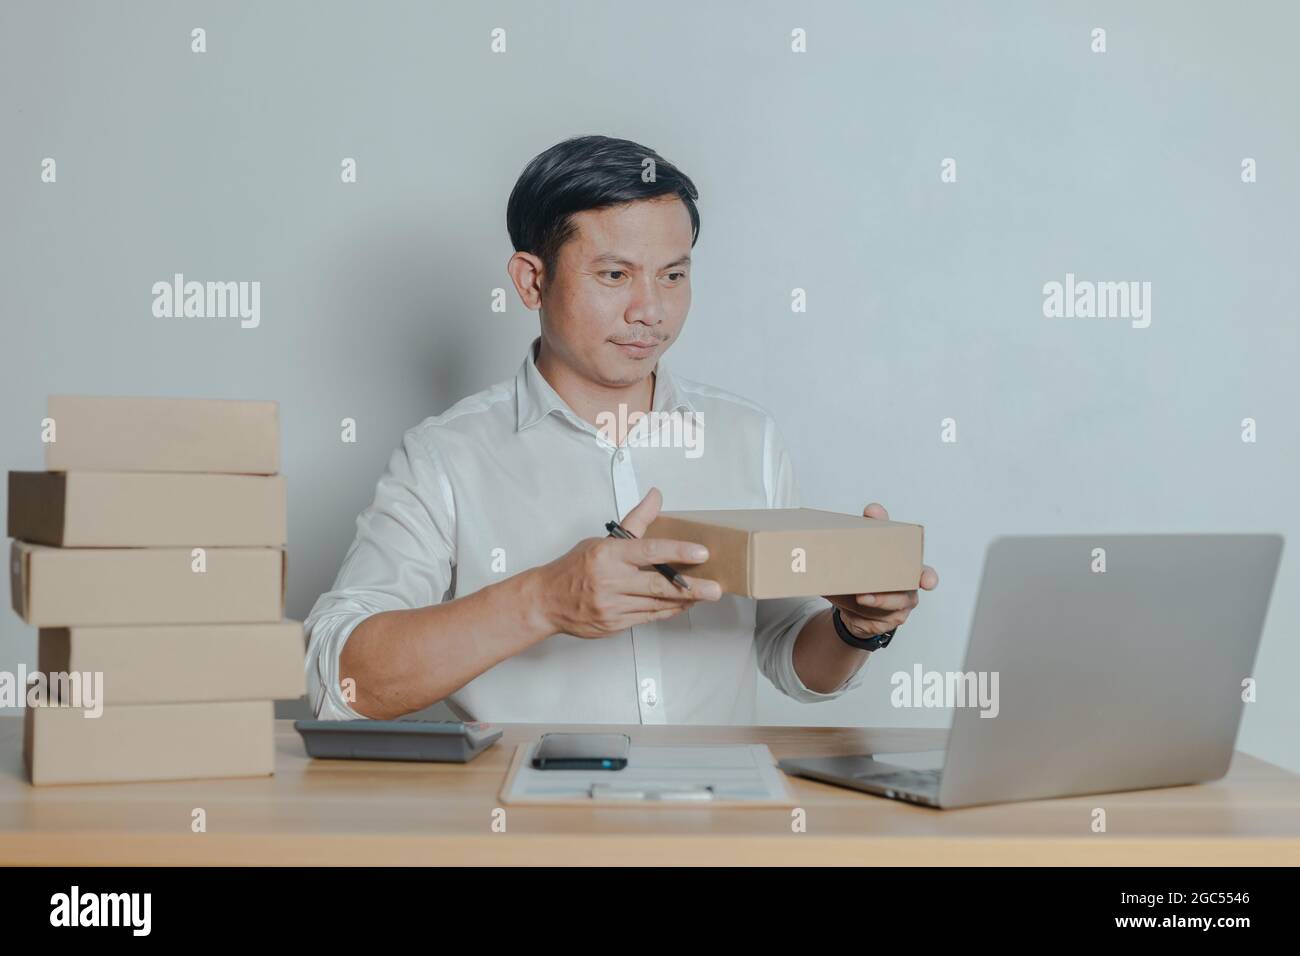 Man selling online at home small business ideas Stock Photo